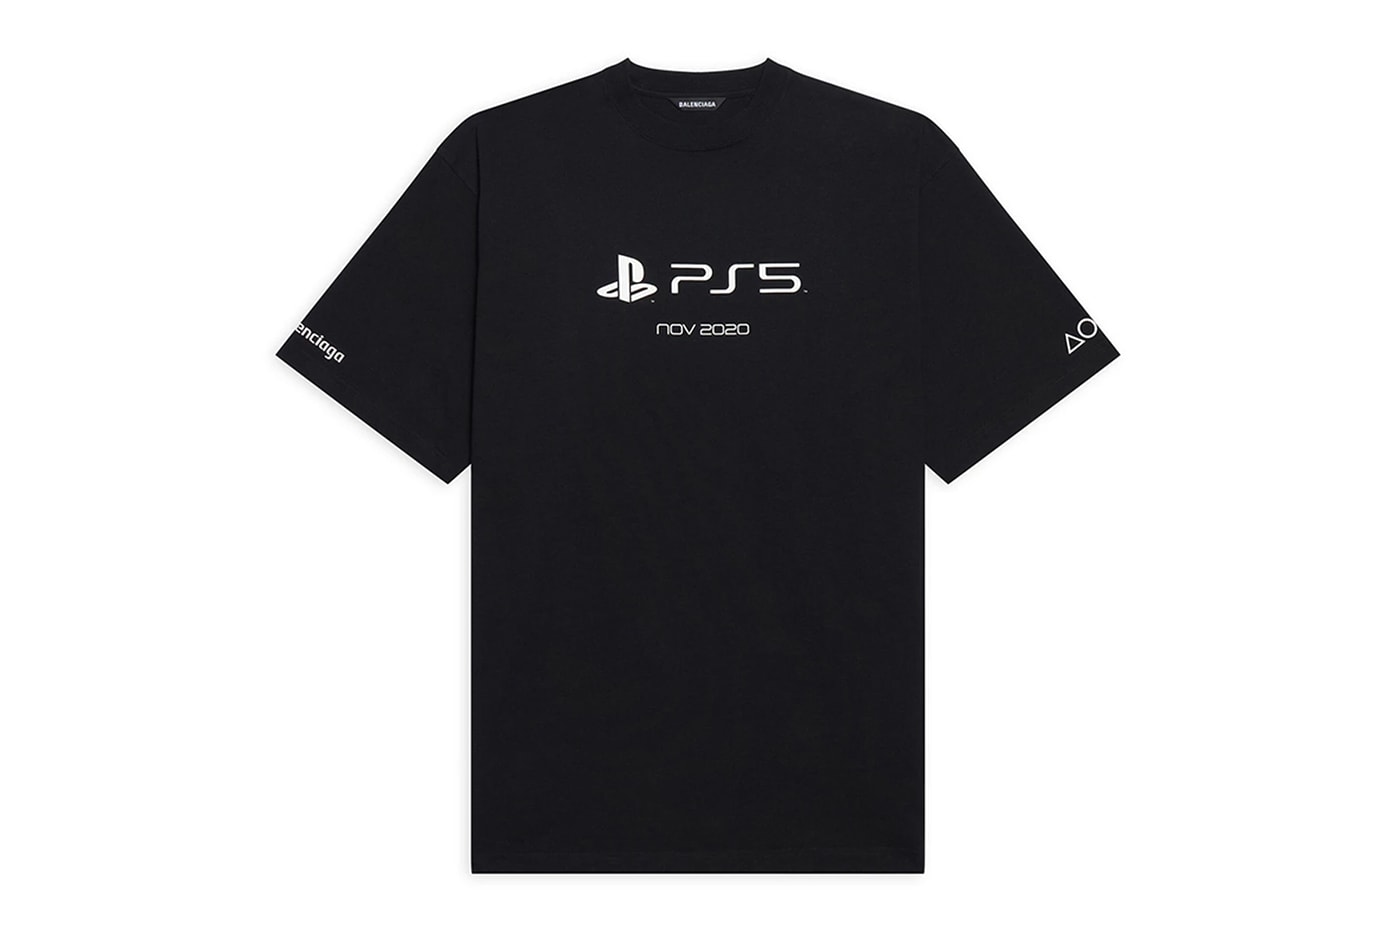 Sony PlayStation 5 Balenciaga Capsule Release T shirt Hoodie Price 